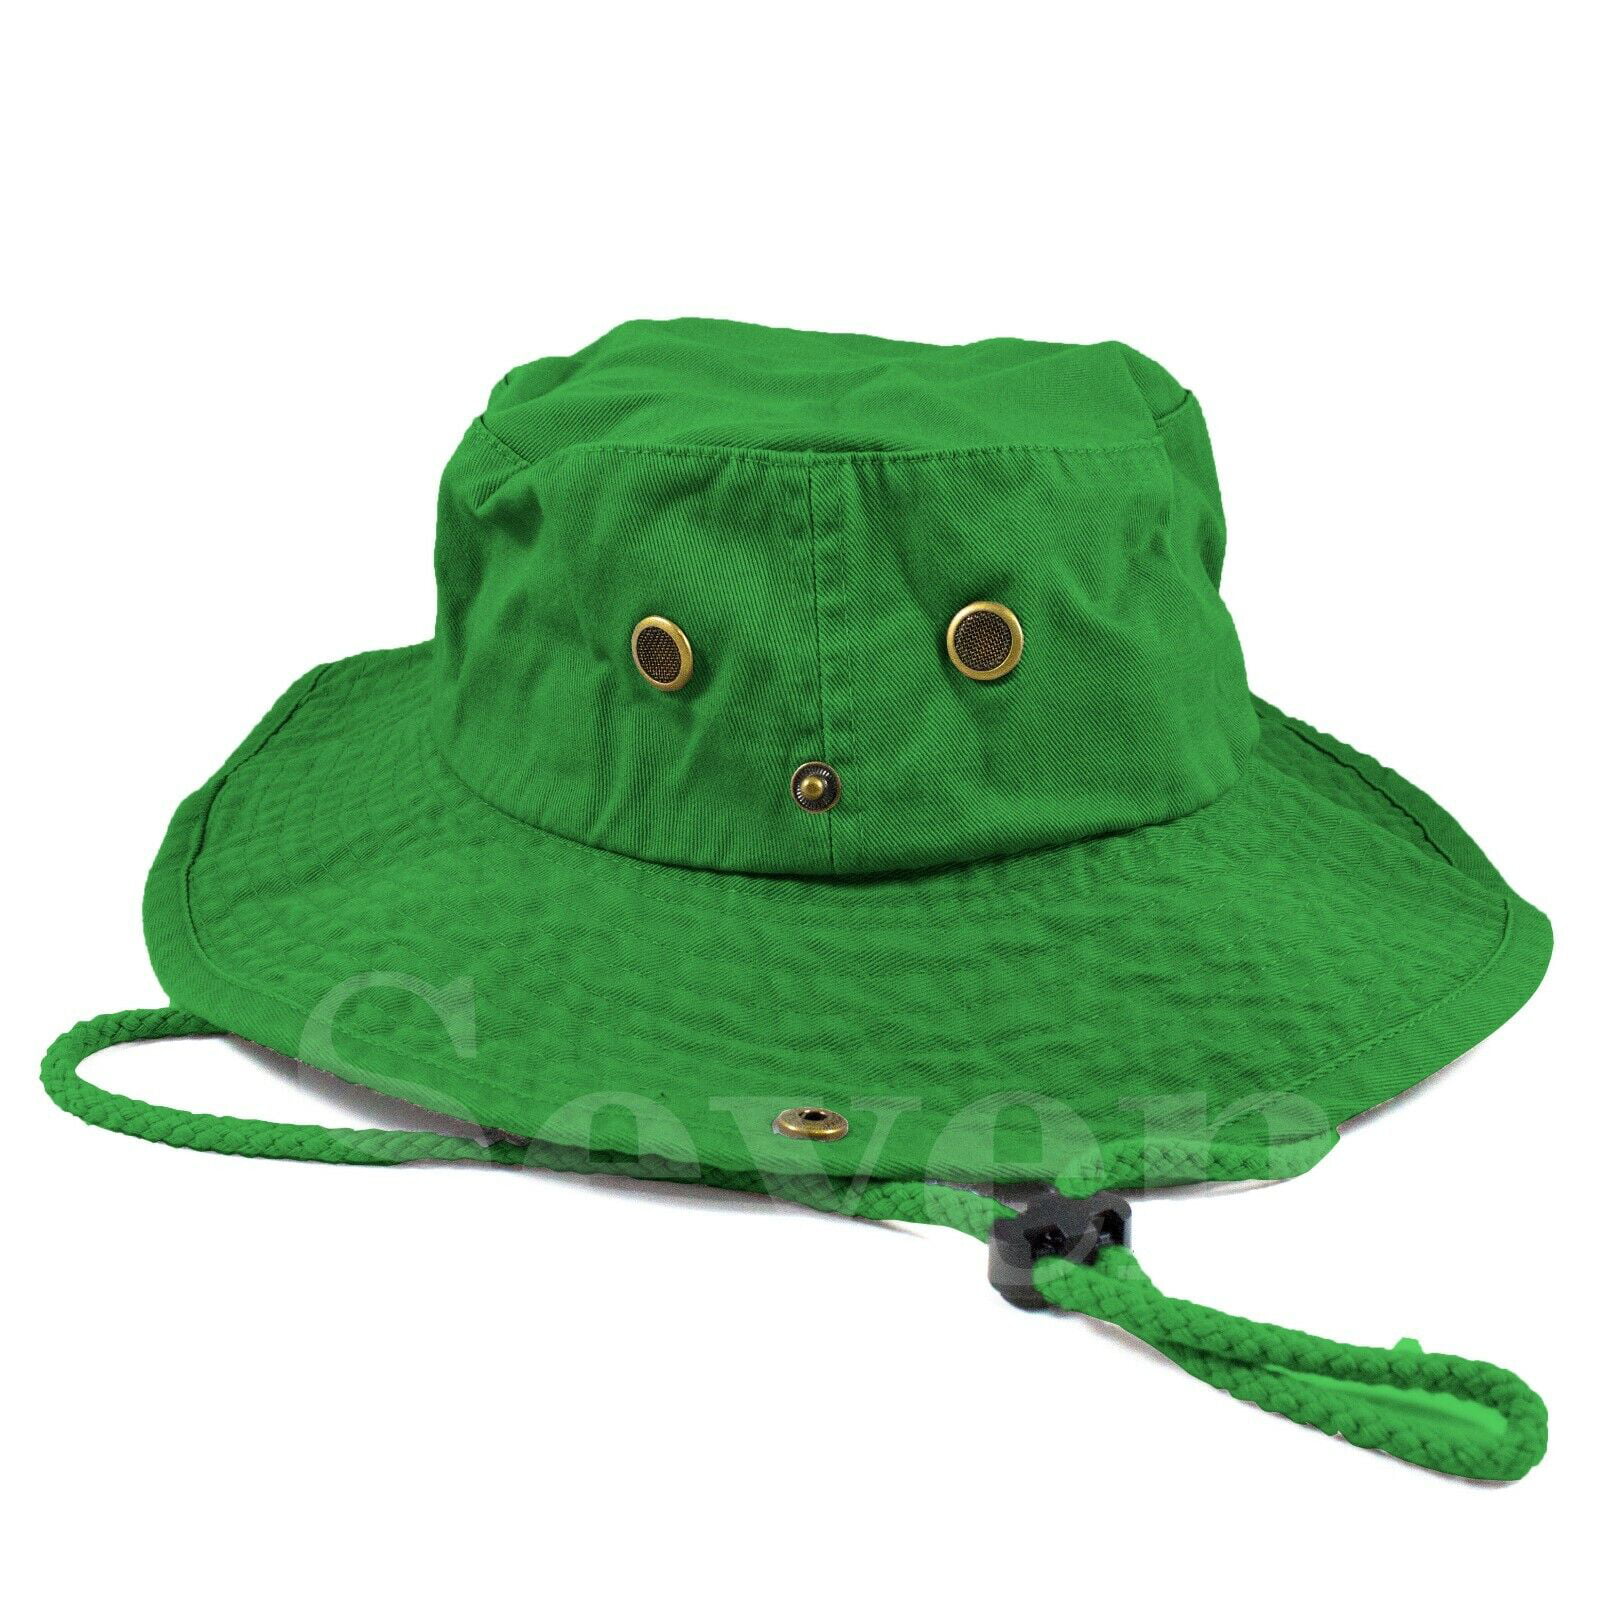 100 % COTTON Bucket Hat Cap Hiking Hunting Fishing US Army Military Sun  Boonie 